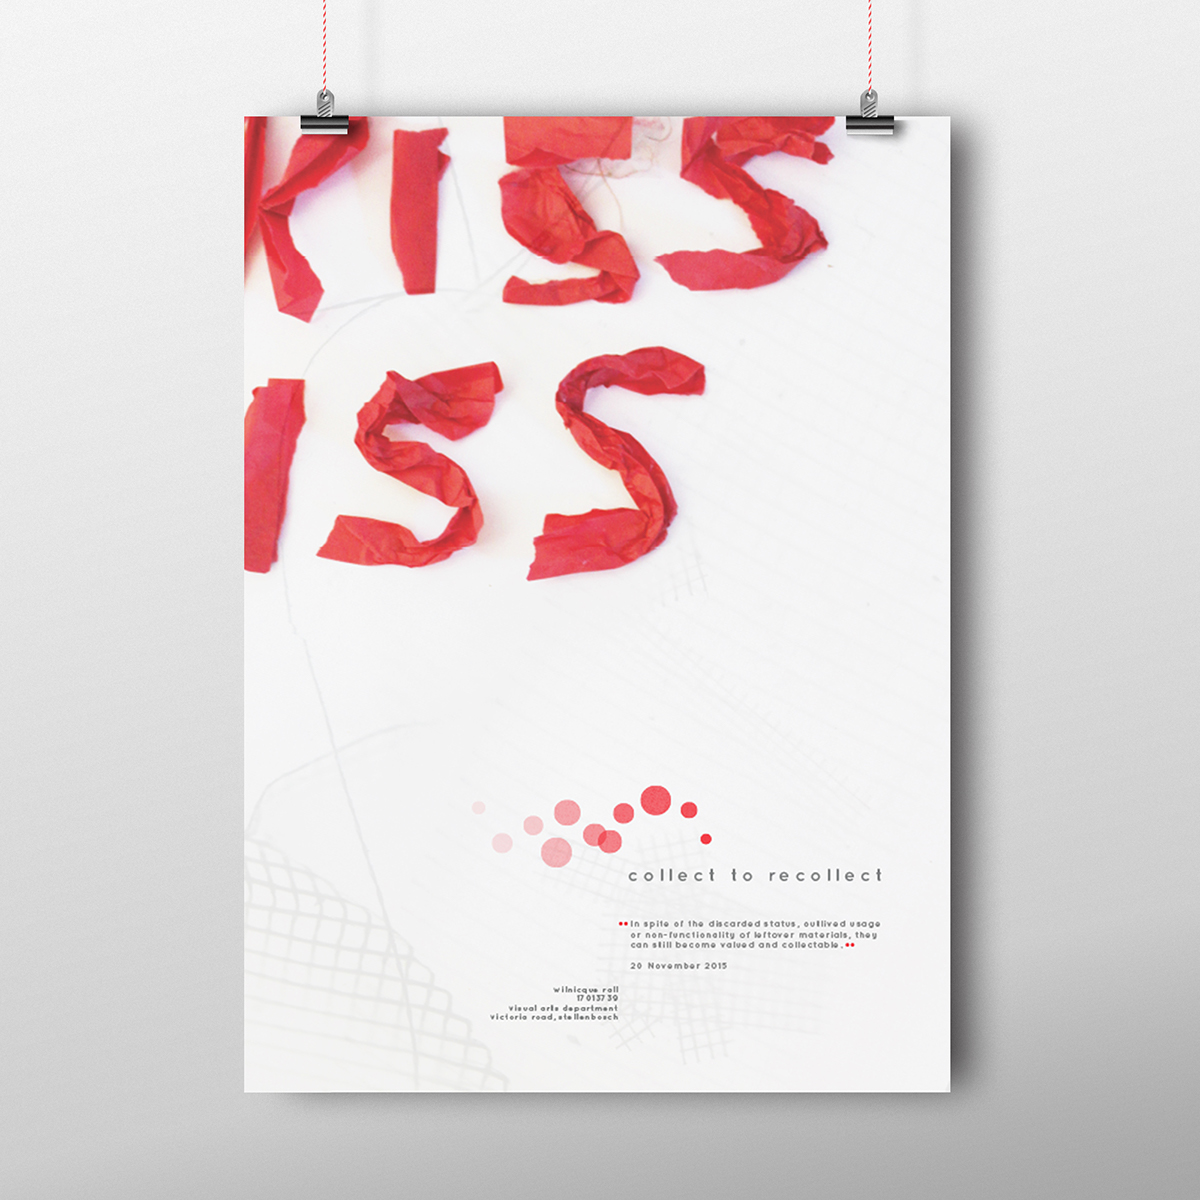 #Kisskiss #posters #materials  #Discards #upcycle #information design